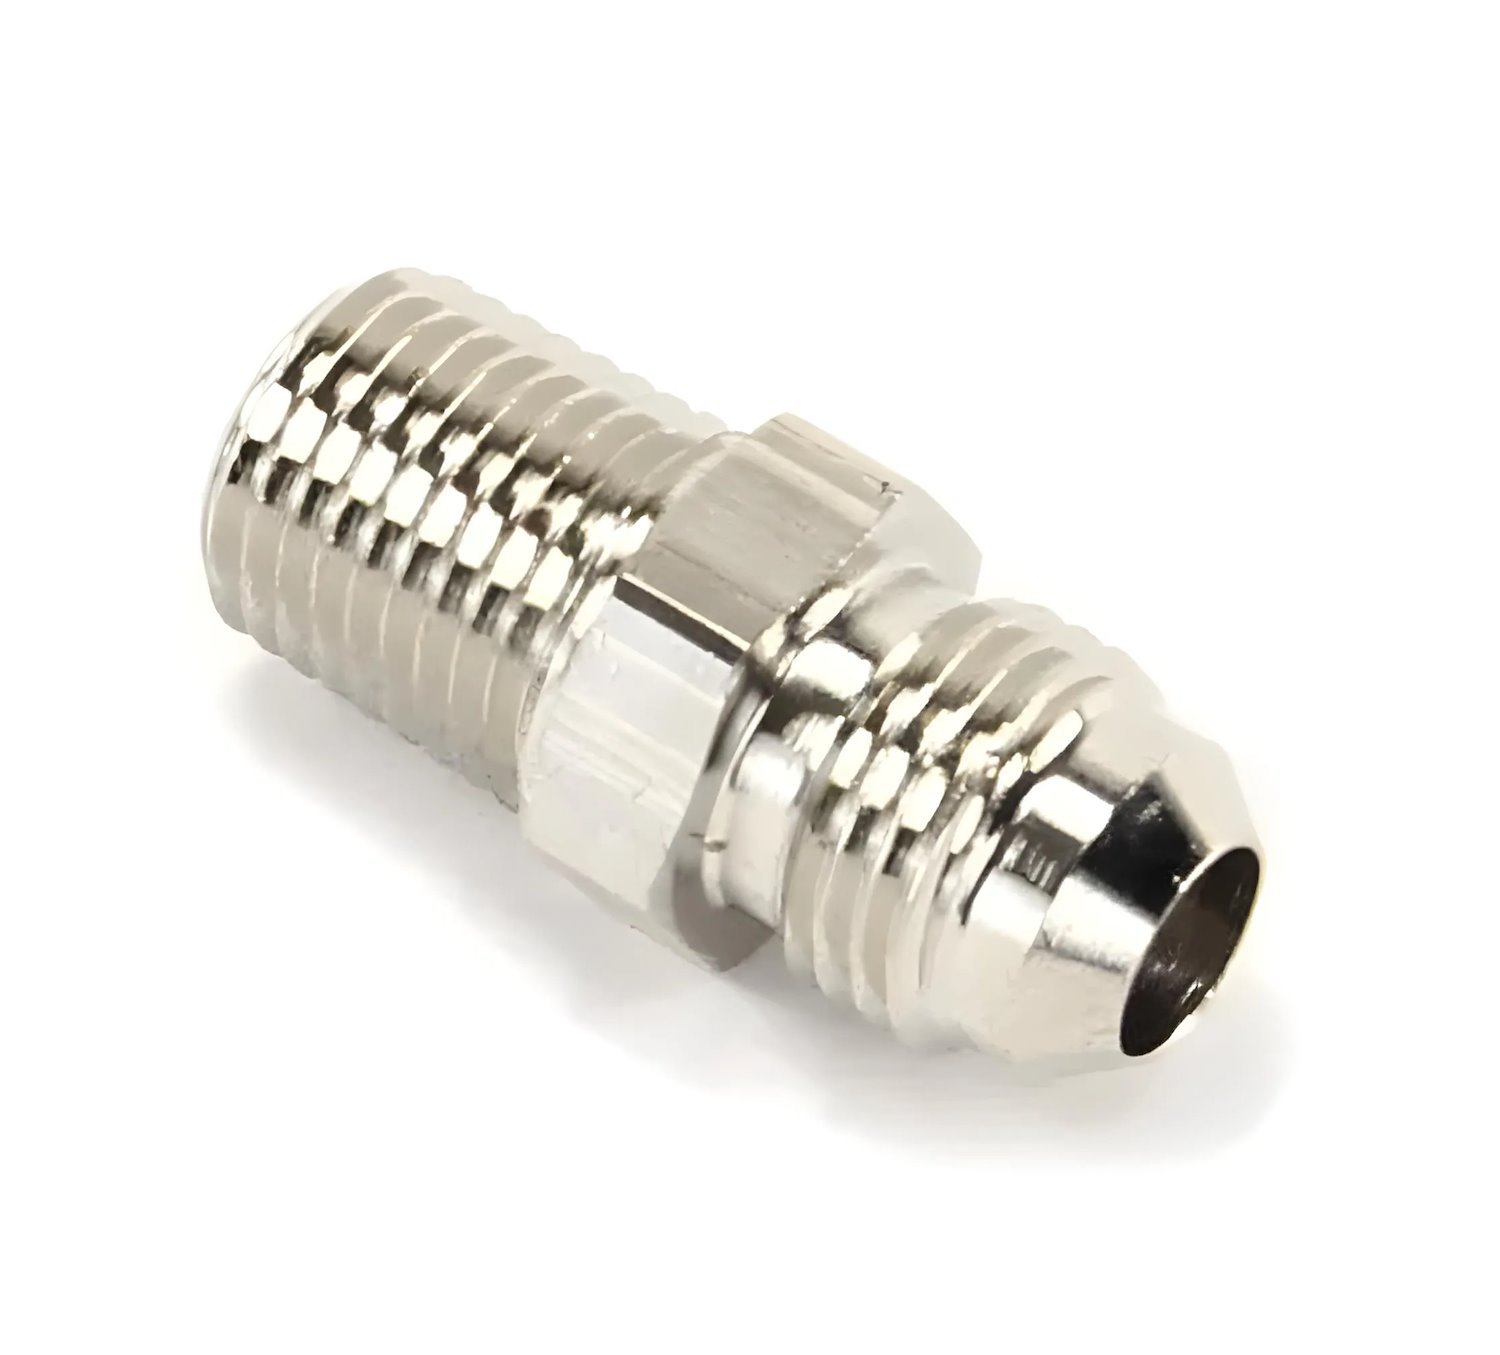 00-01156-B 1/4 in. NPT x 6AN Straight Fitting, Male/Male